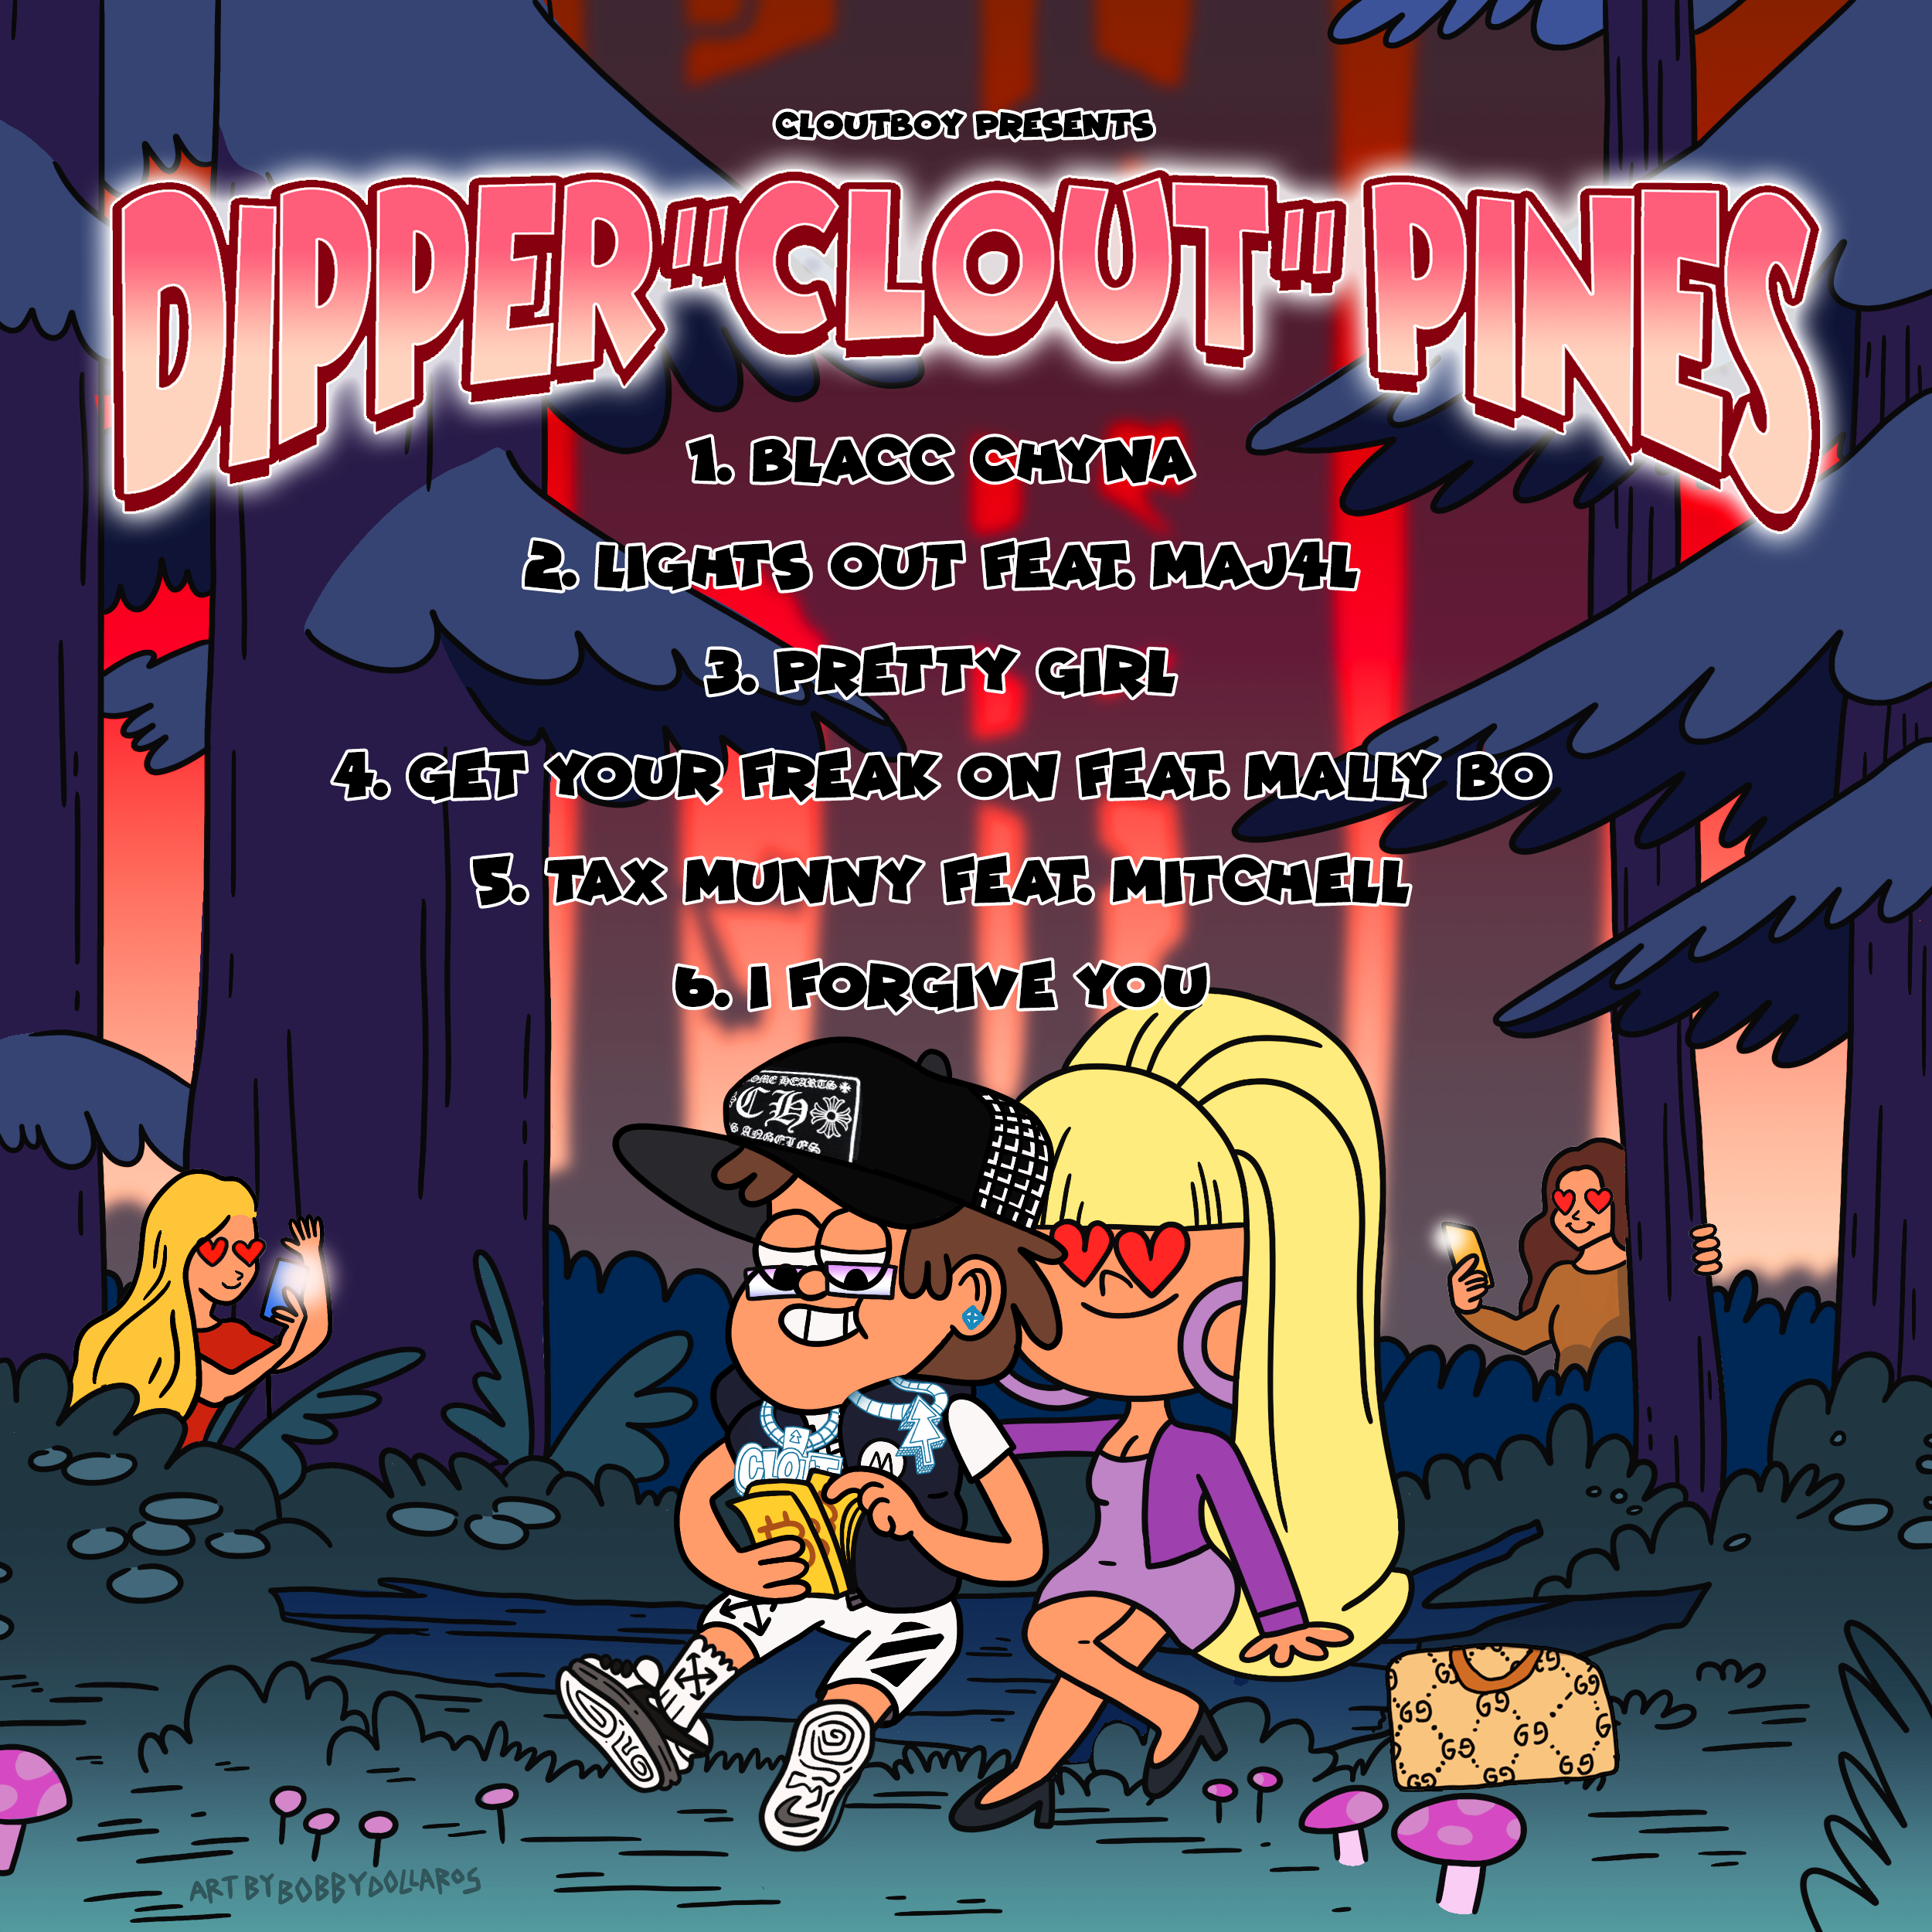 Deeper_Clout_Pines_Tracklist